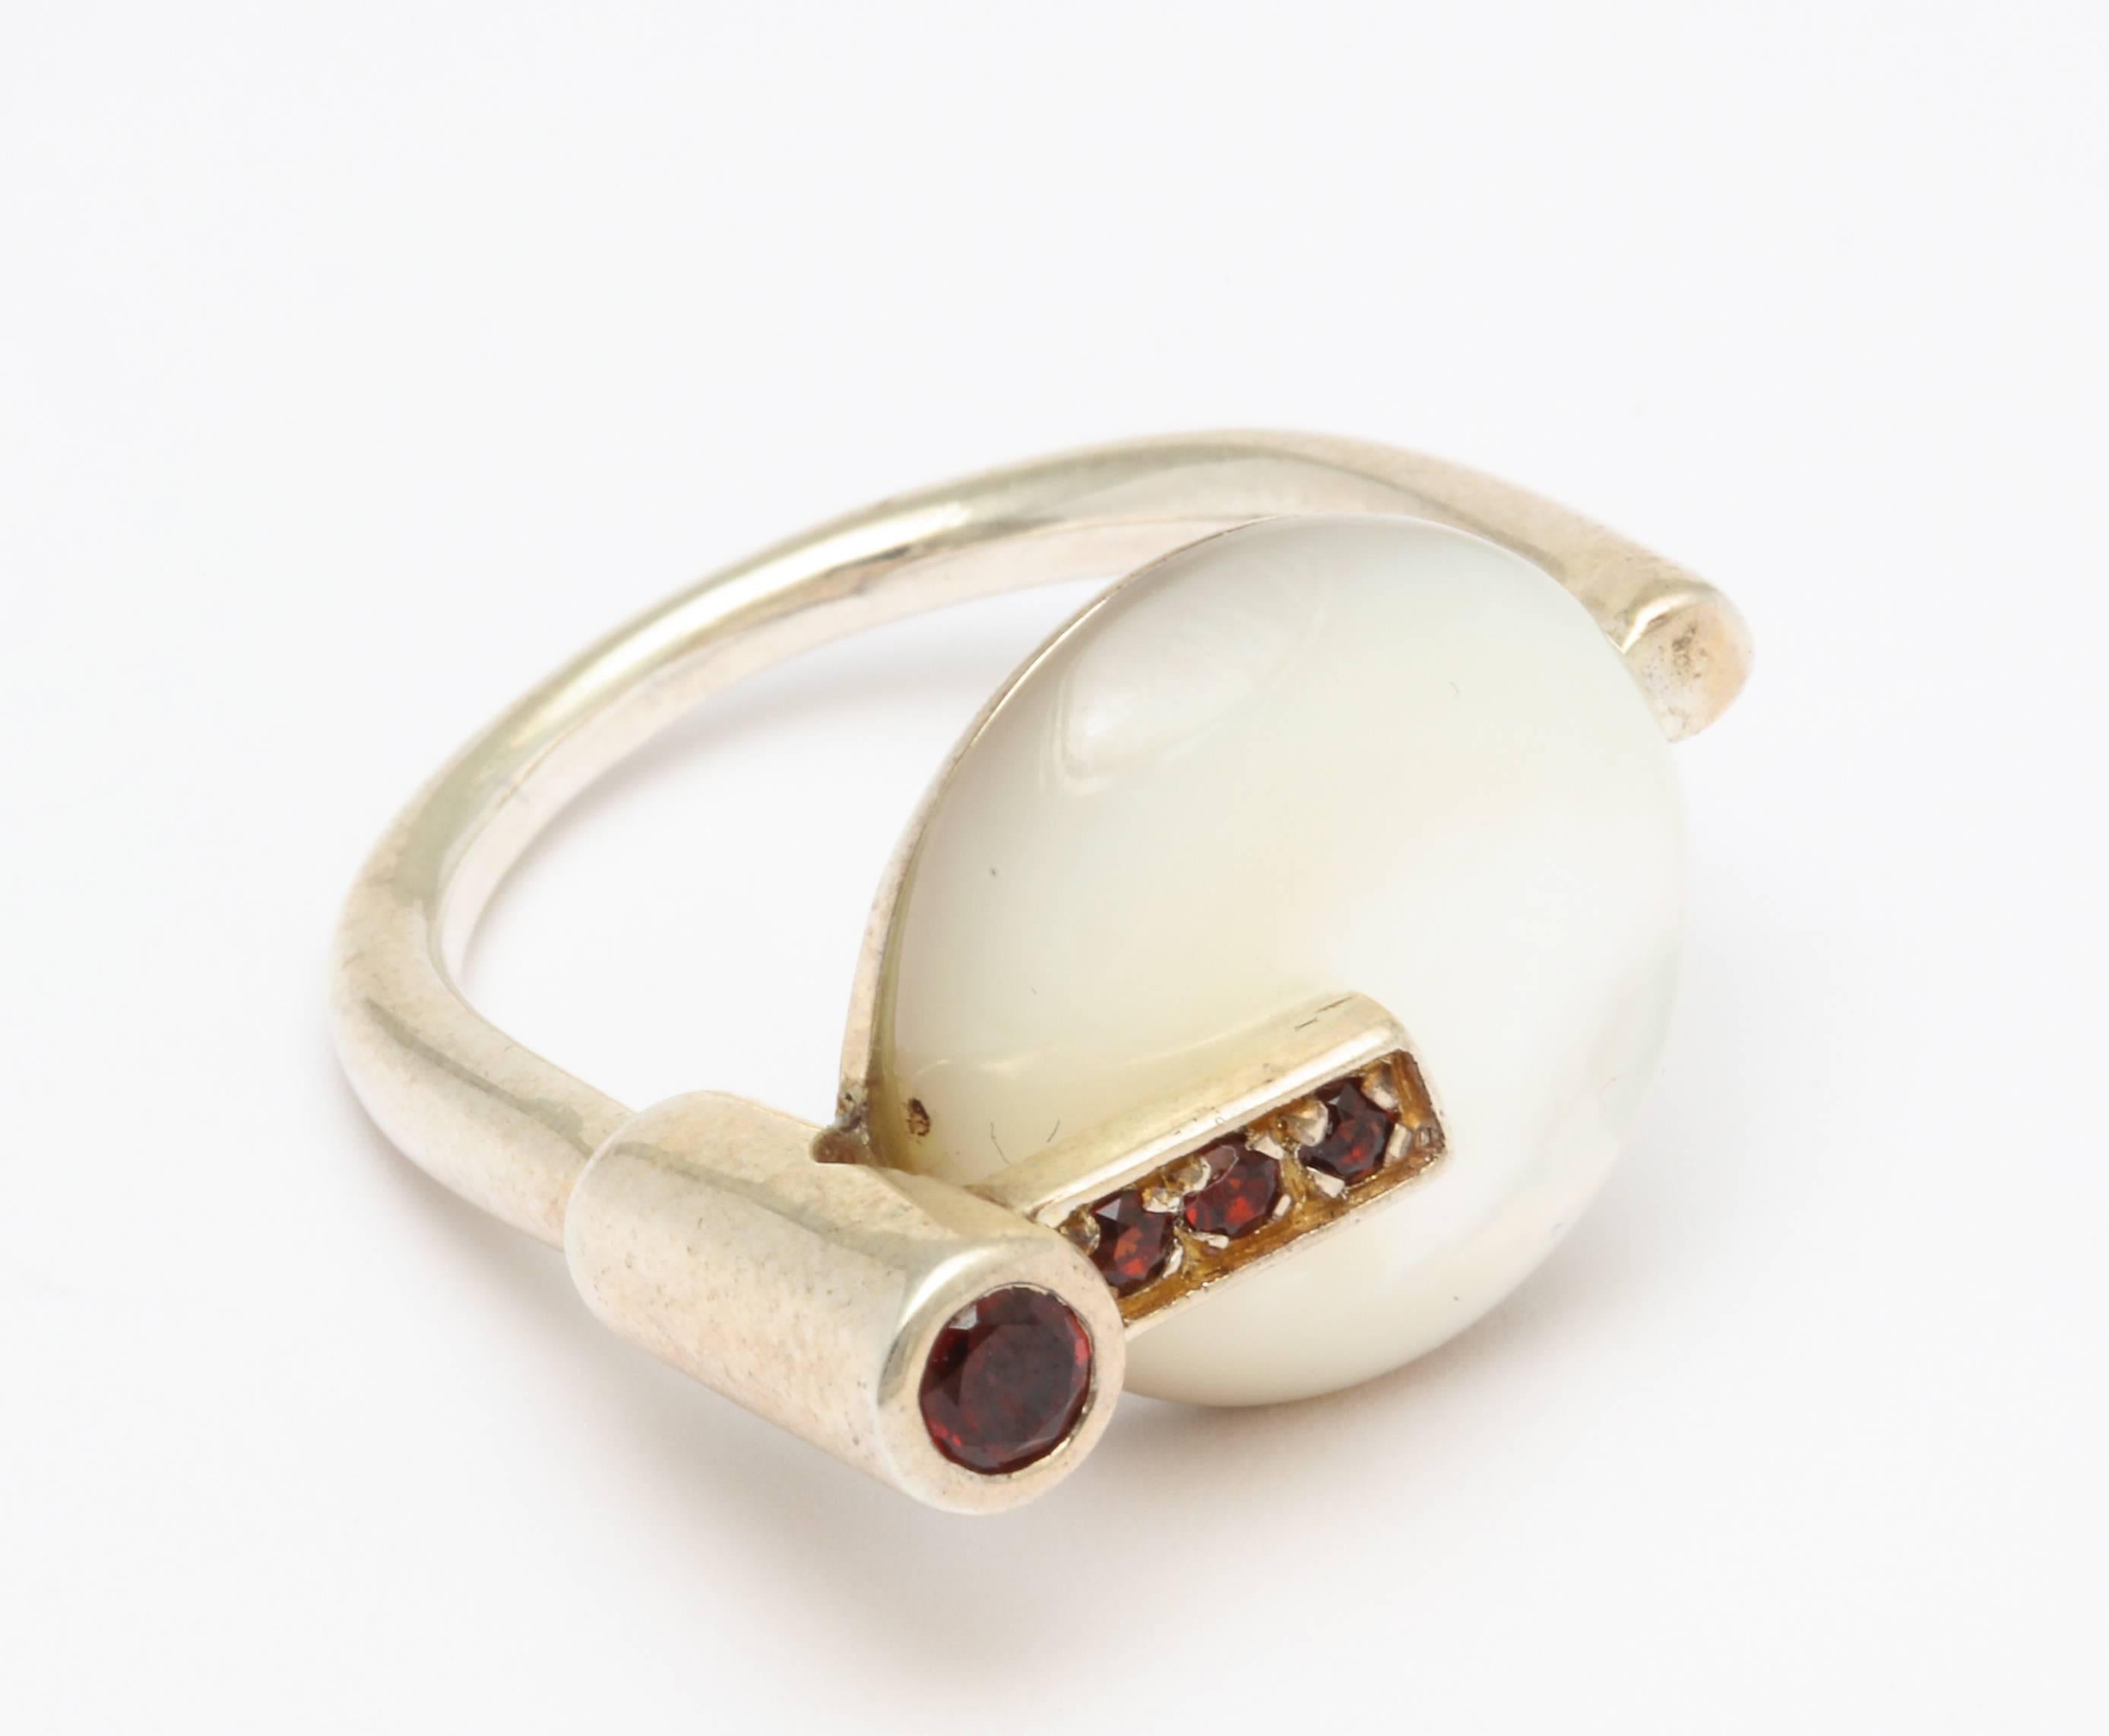 A stunning  modernist ring with garnets and mother of pearl on sterling silver by a German Designer